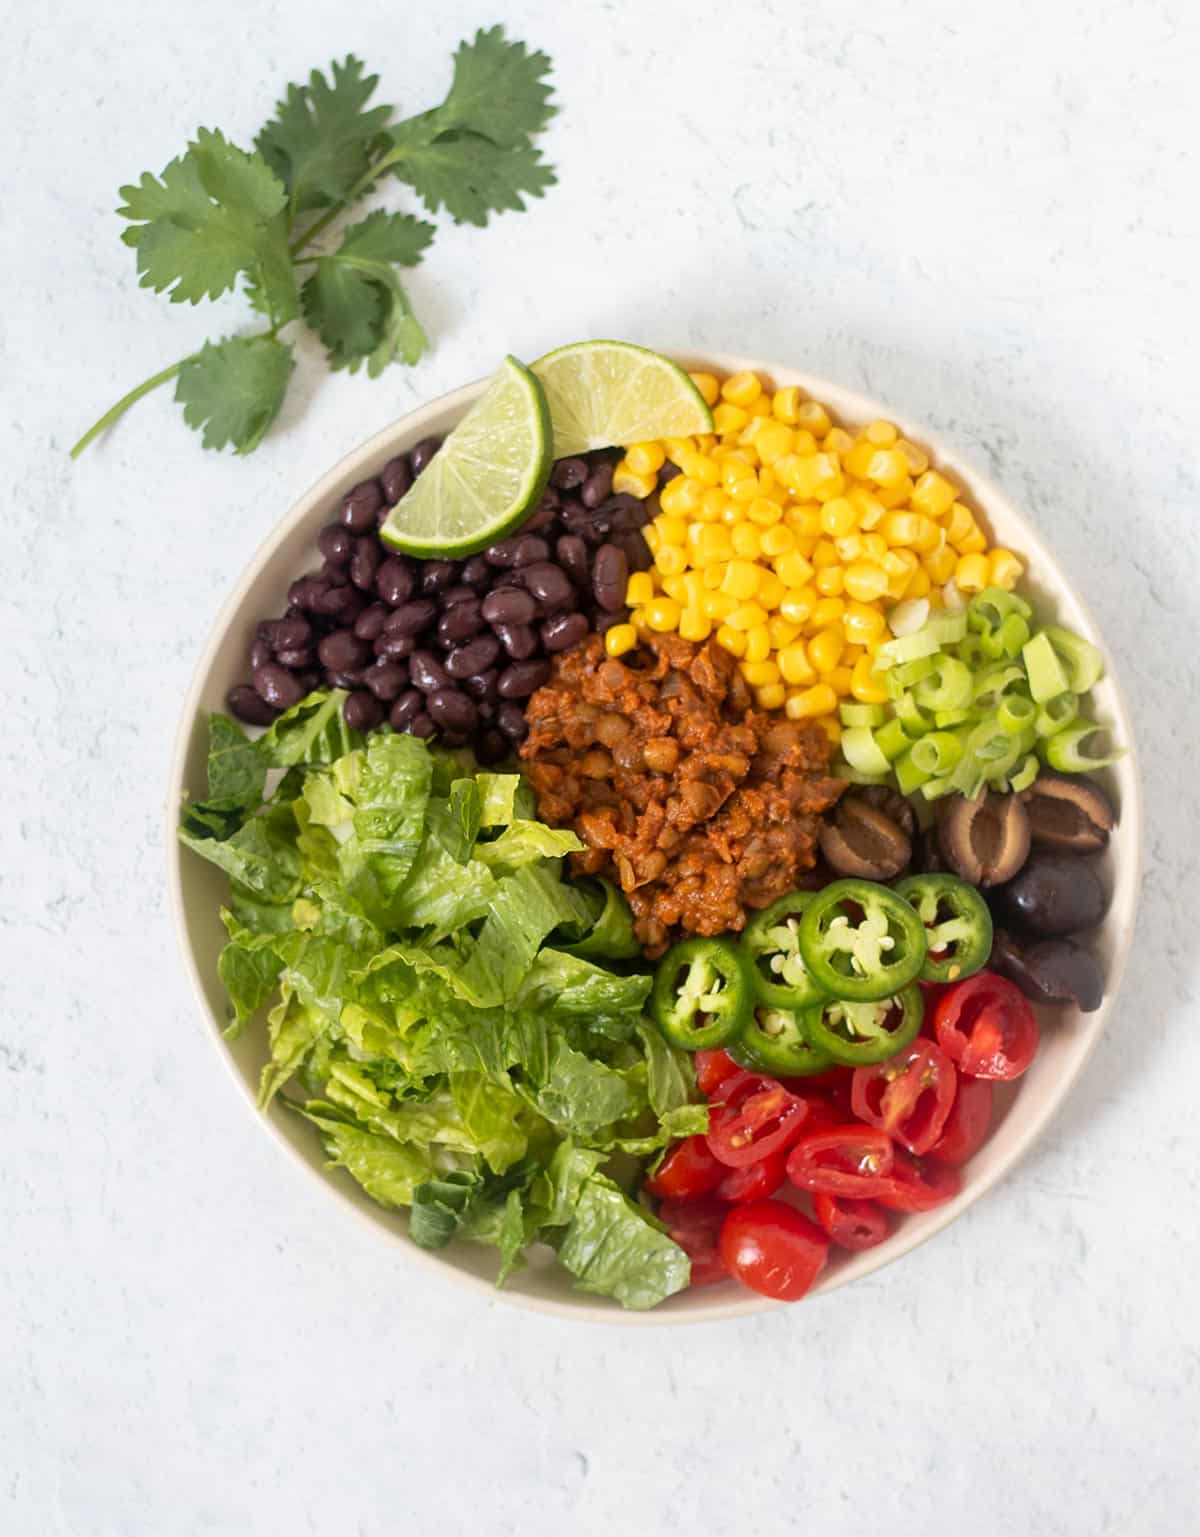 healthy taco salad ingredients on a white salad plate. Black beans, yellow corn, green onions, black olives, grape tomatoes, jalapeños, romaine lettuce lentil taco meat and lime wedges on the plate. Cilantro is next to the plate.